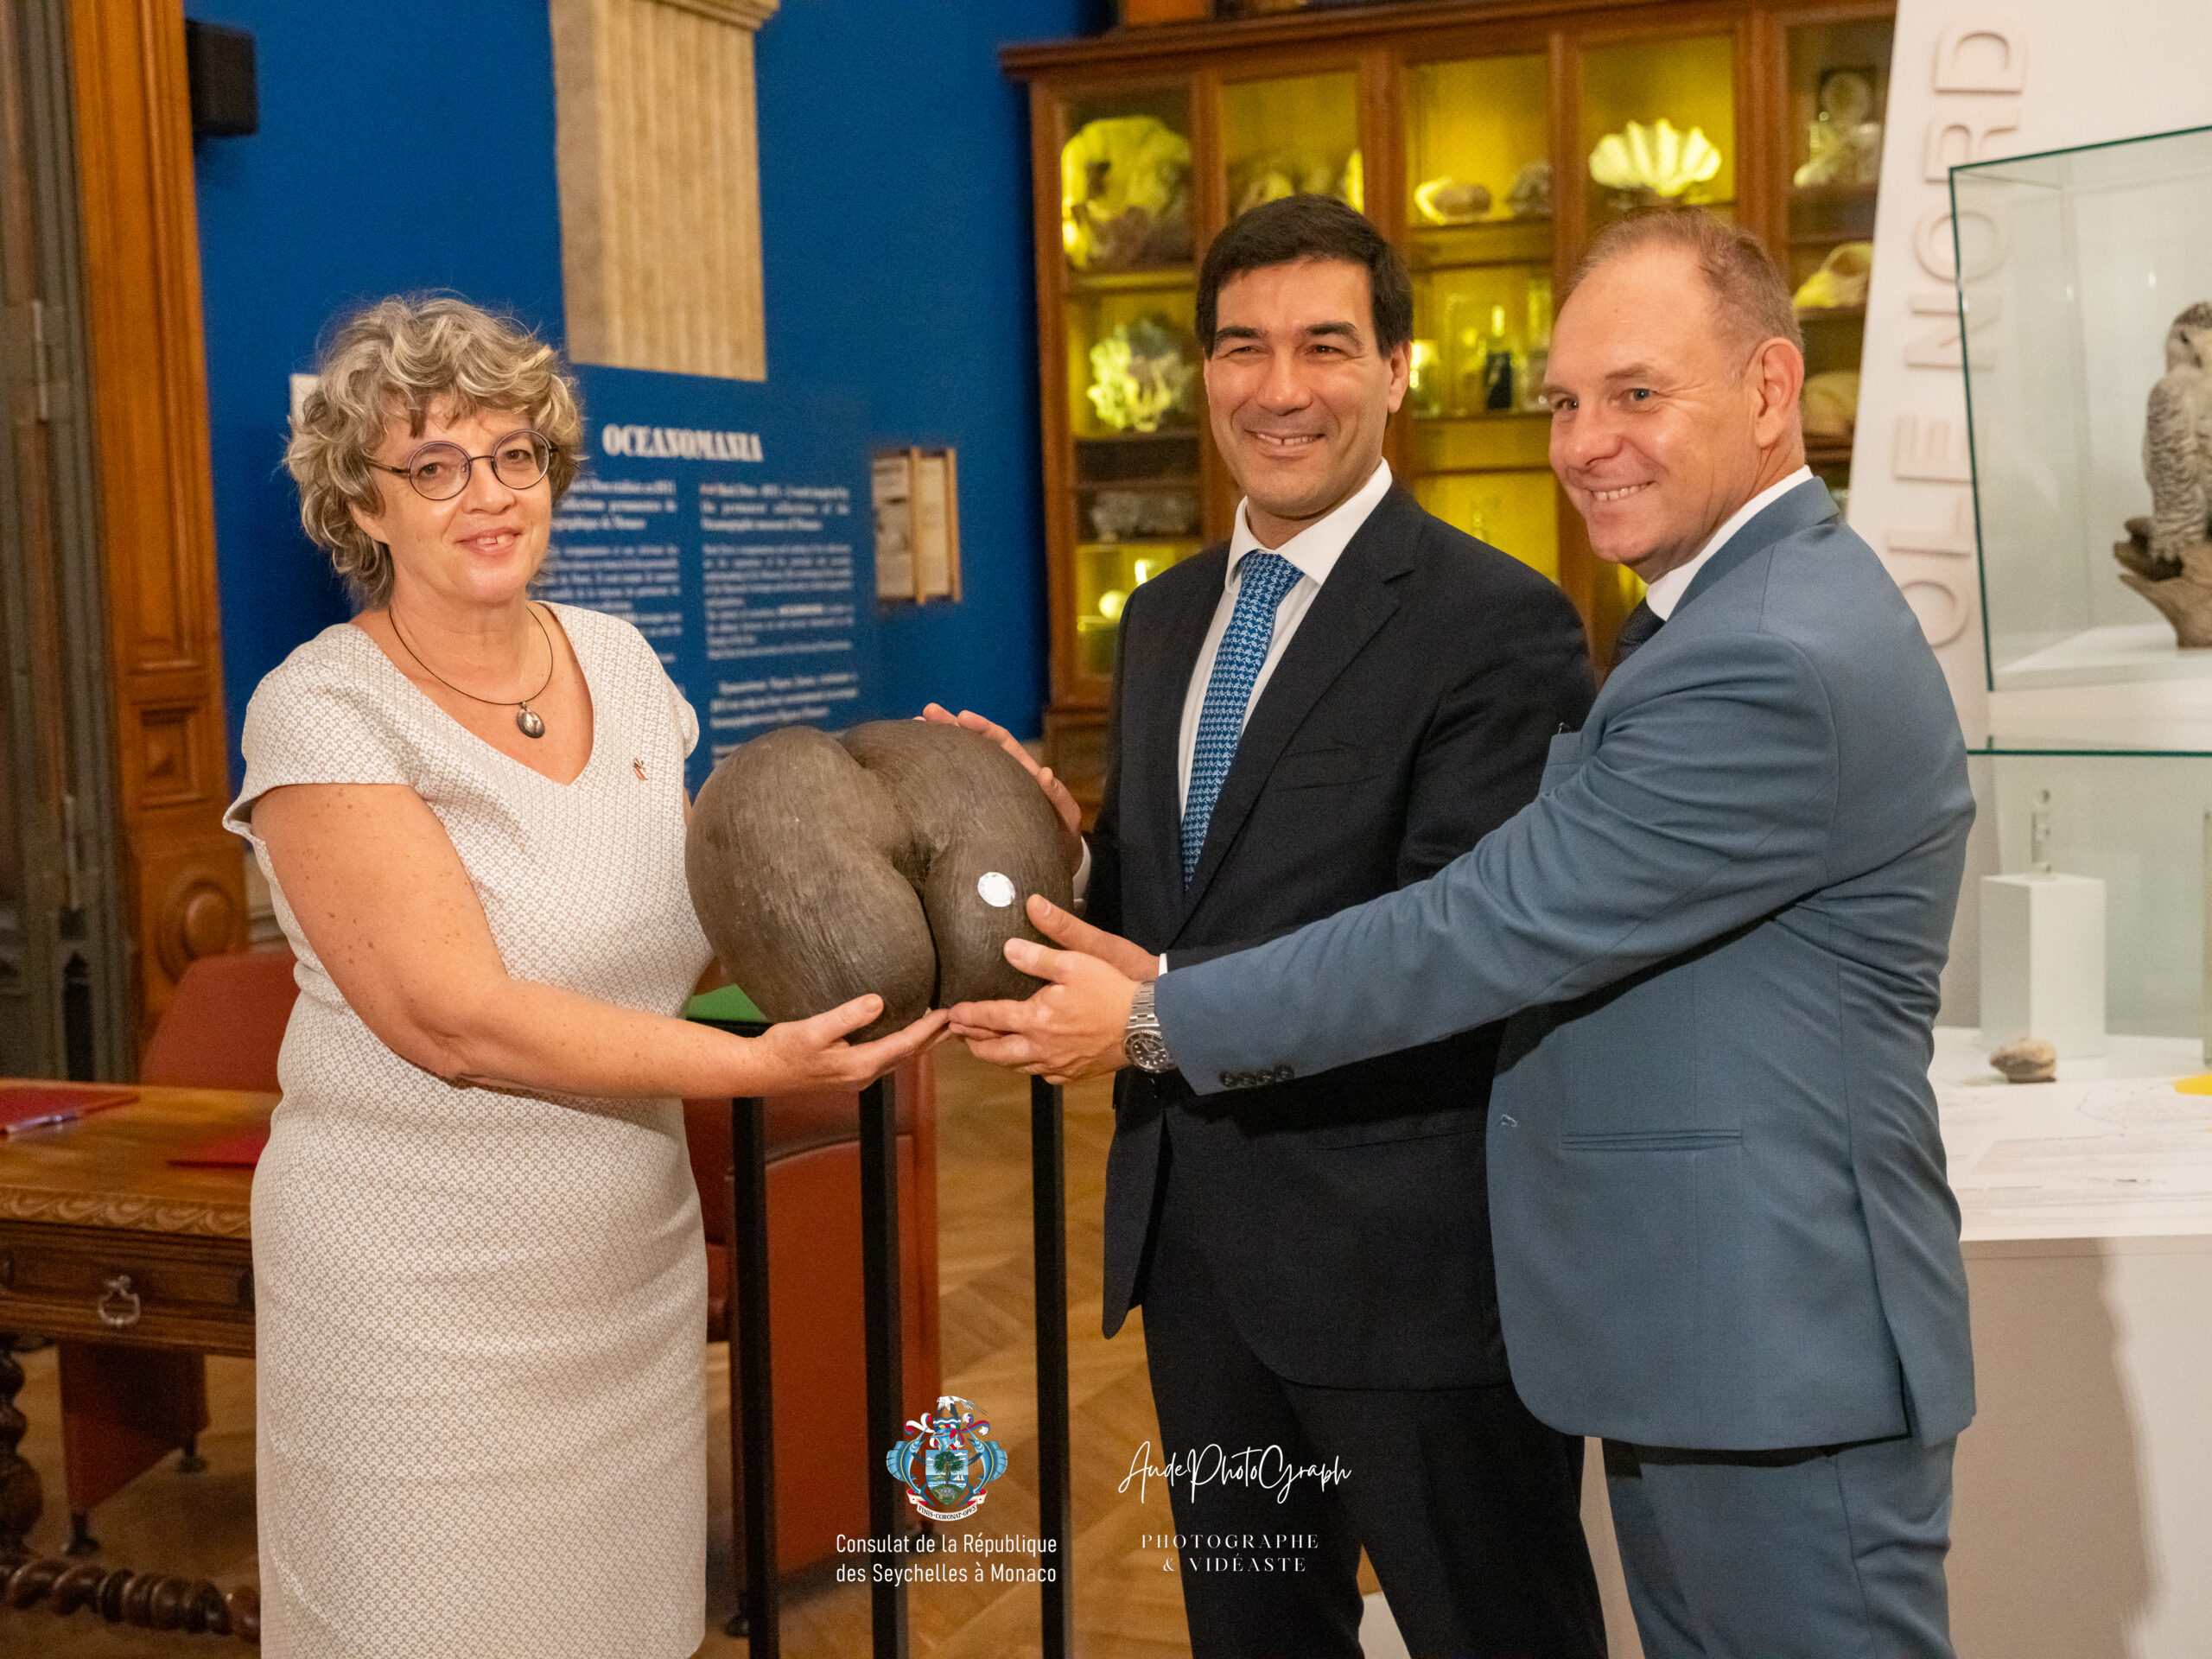 « Des Seychelles à Monaco: An unforgettable event with an official donation of a Coco de mer seed by the Seychelles Islands Foundation (SIF) to the Oceanographic Museum of Monaco.